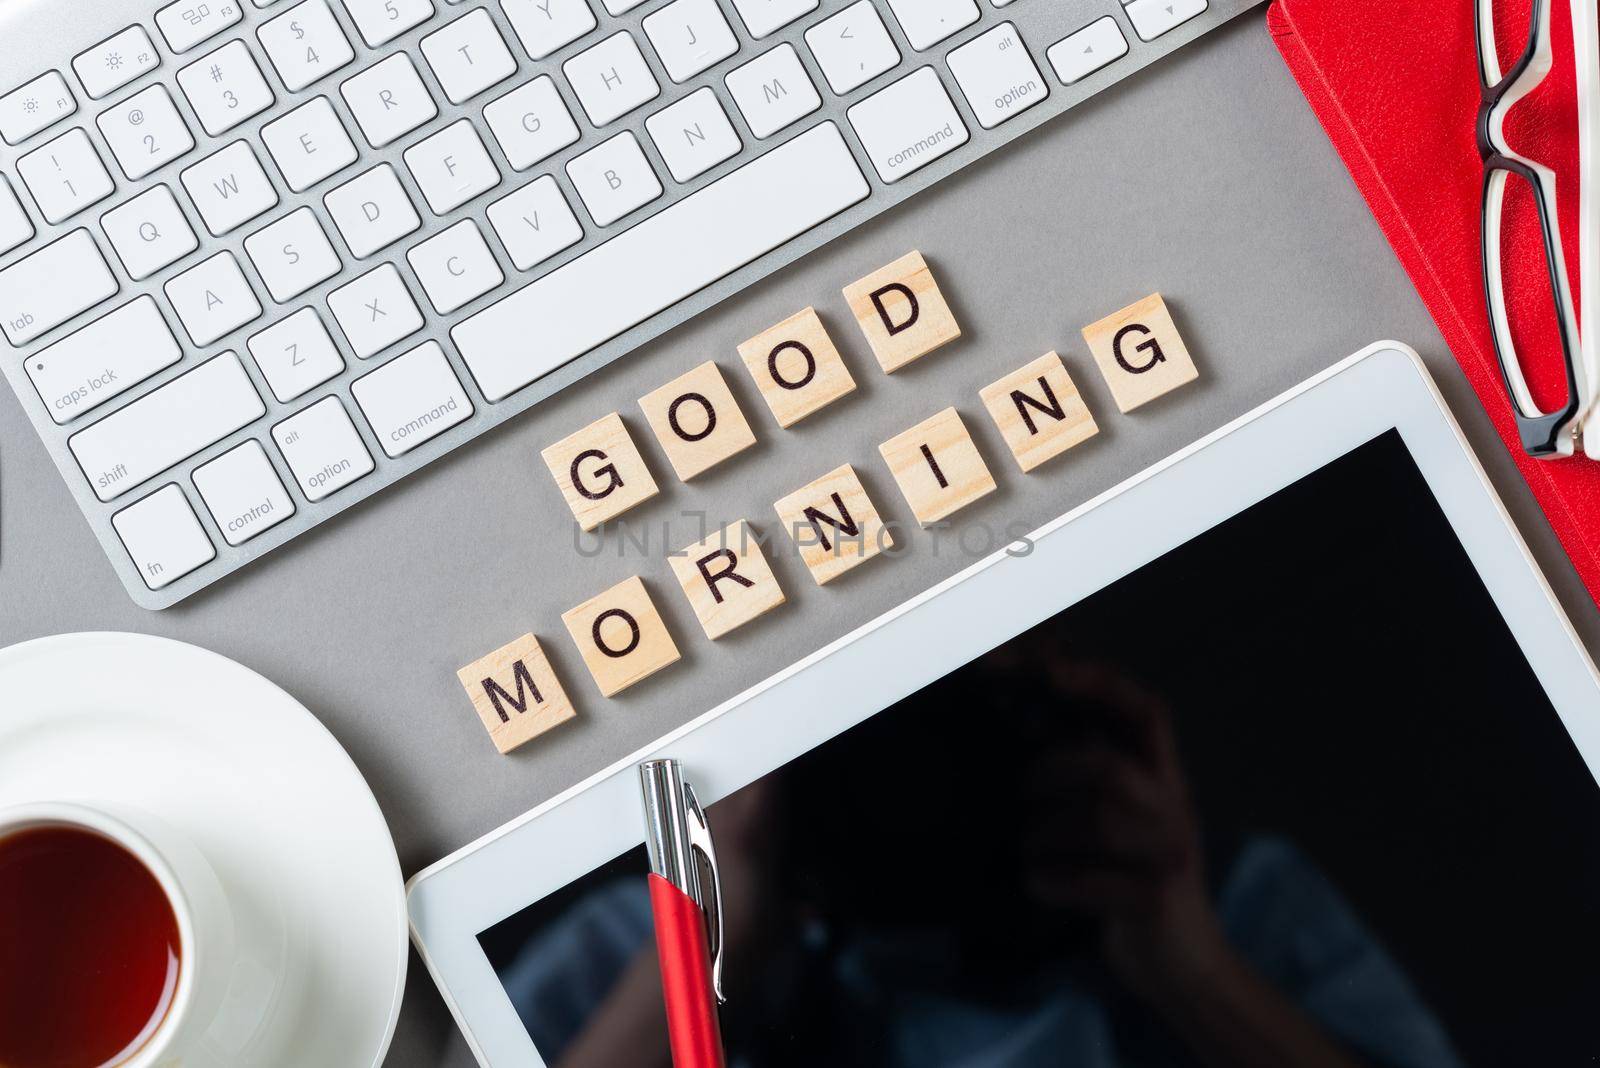 Good morning message with letters on wooden cubes. Still life of workspace with supplies. Flat lay grey surface with computer keyboard and cup of tea. Morning greeting phrase and motivation.